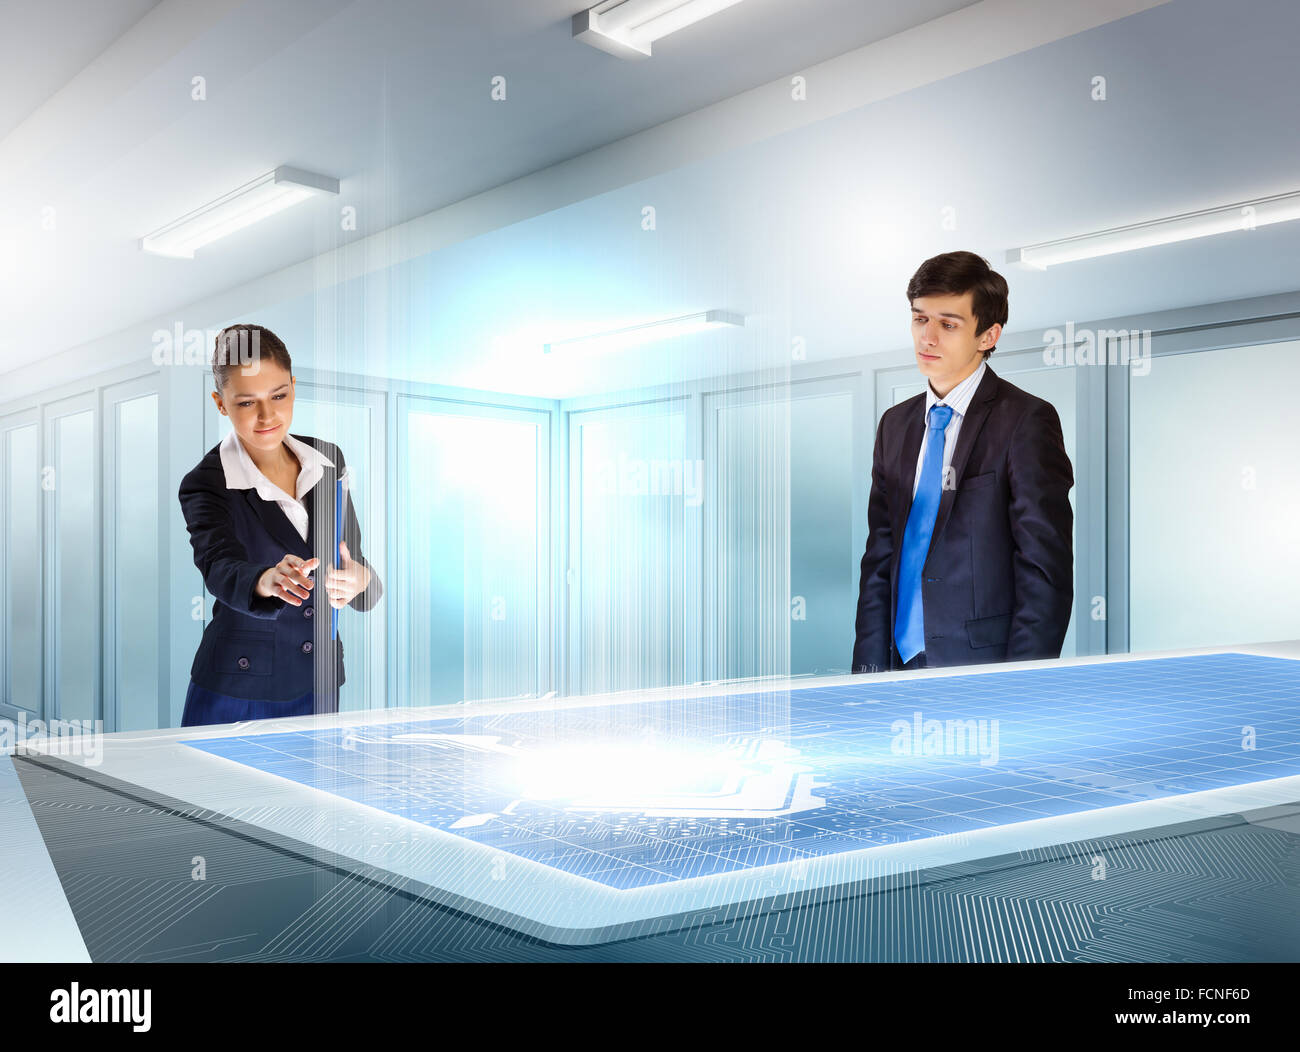 young businesspeople clicking on icon of high-tech image Stock Photo